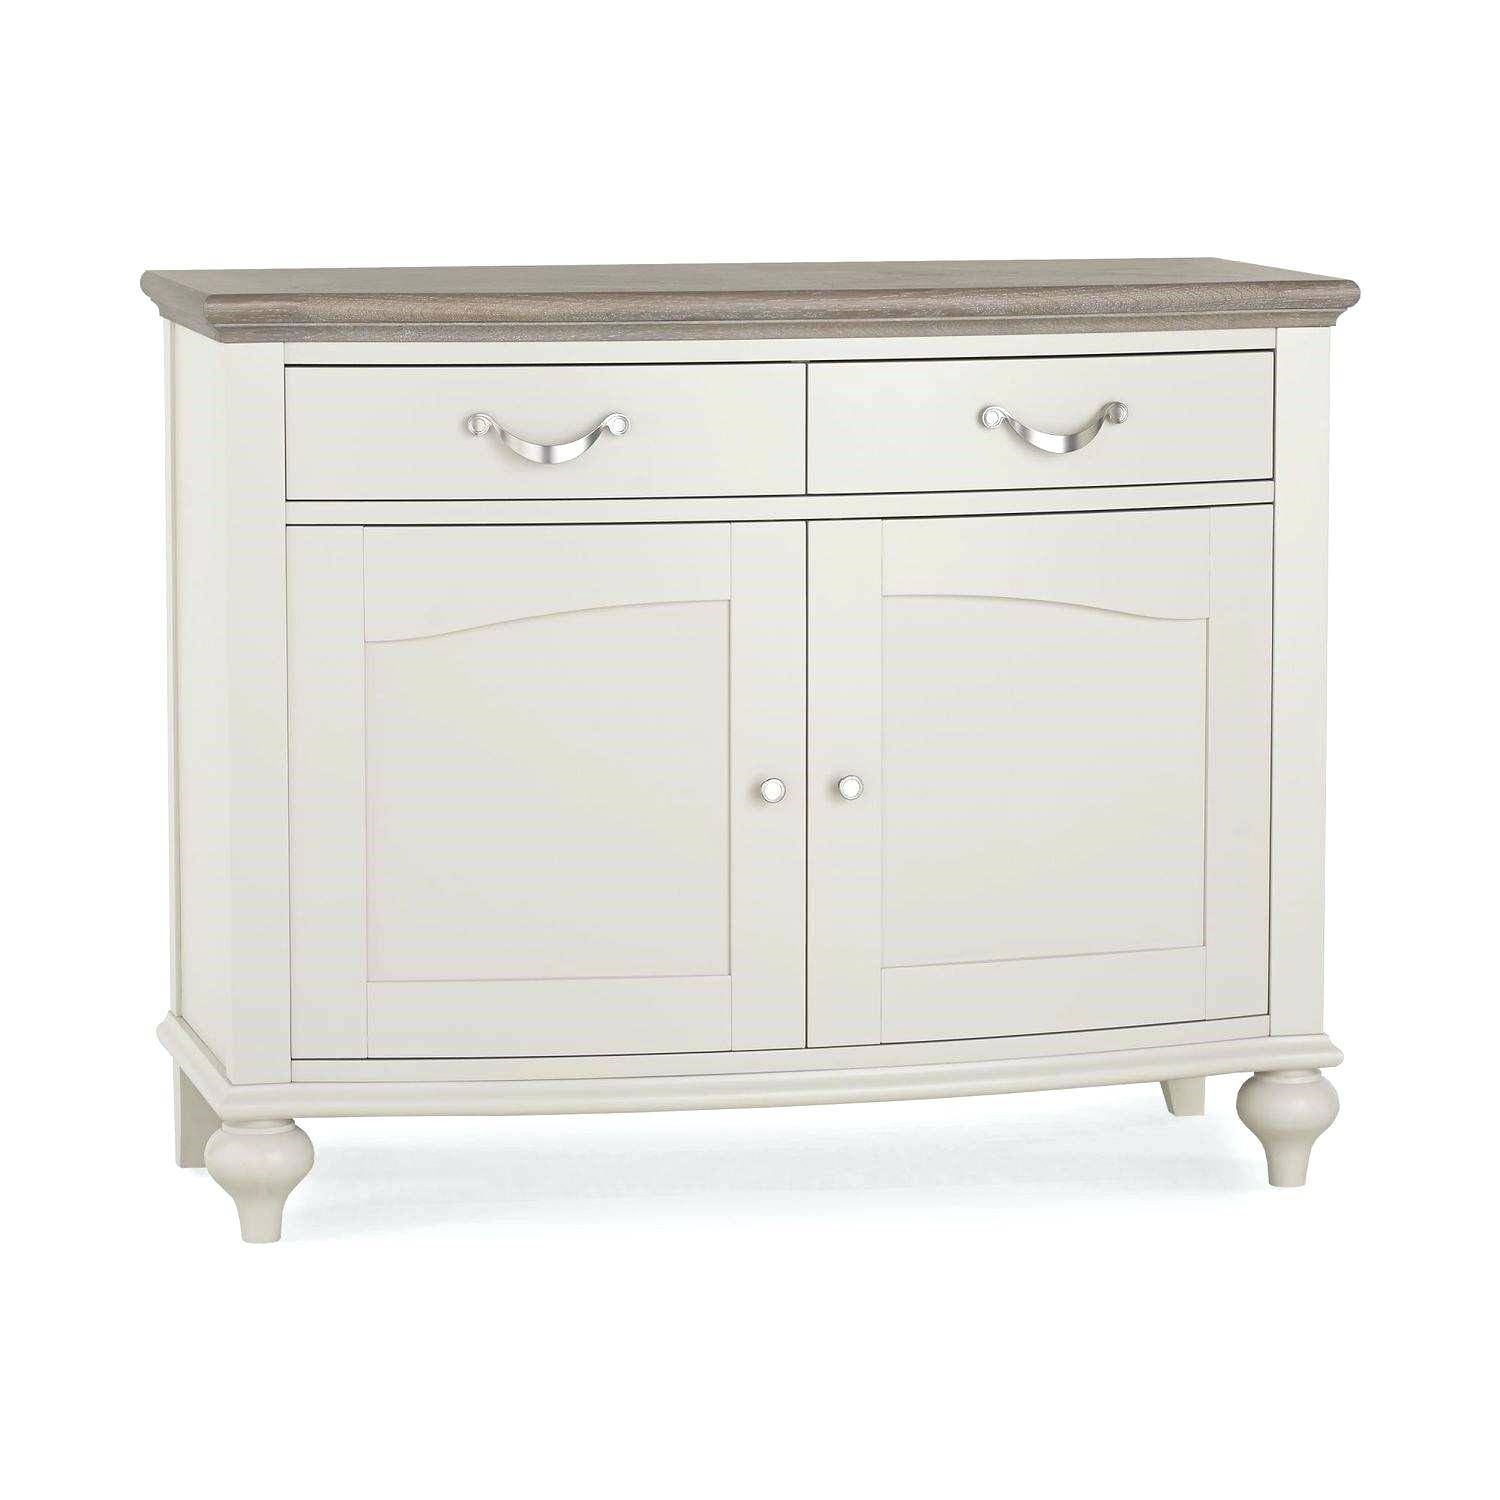 Narrow Sideboard Designs Grey Washed Oak Amp Soft Grey Narrow Within Most Popular Small Narrow Sideboards (View 10 of 15)